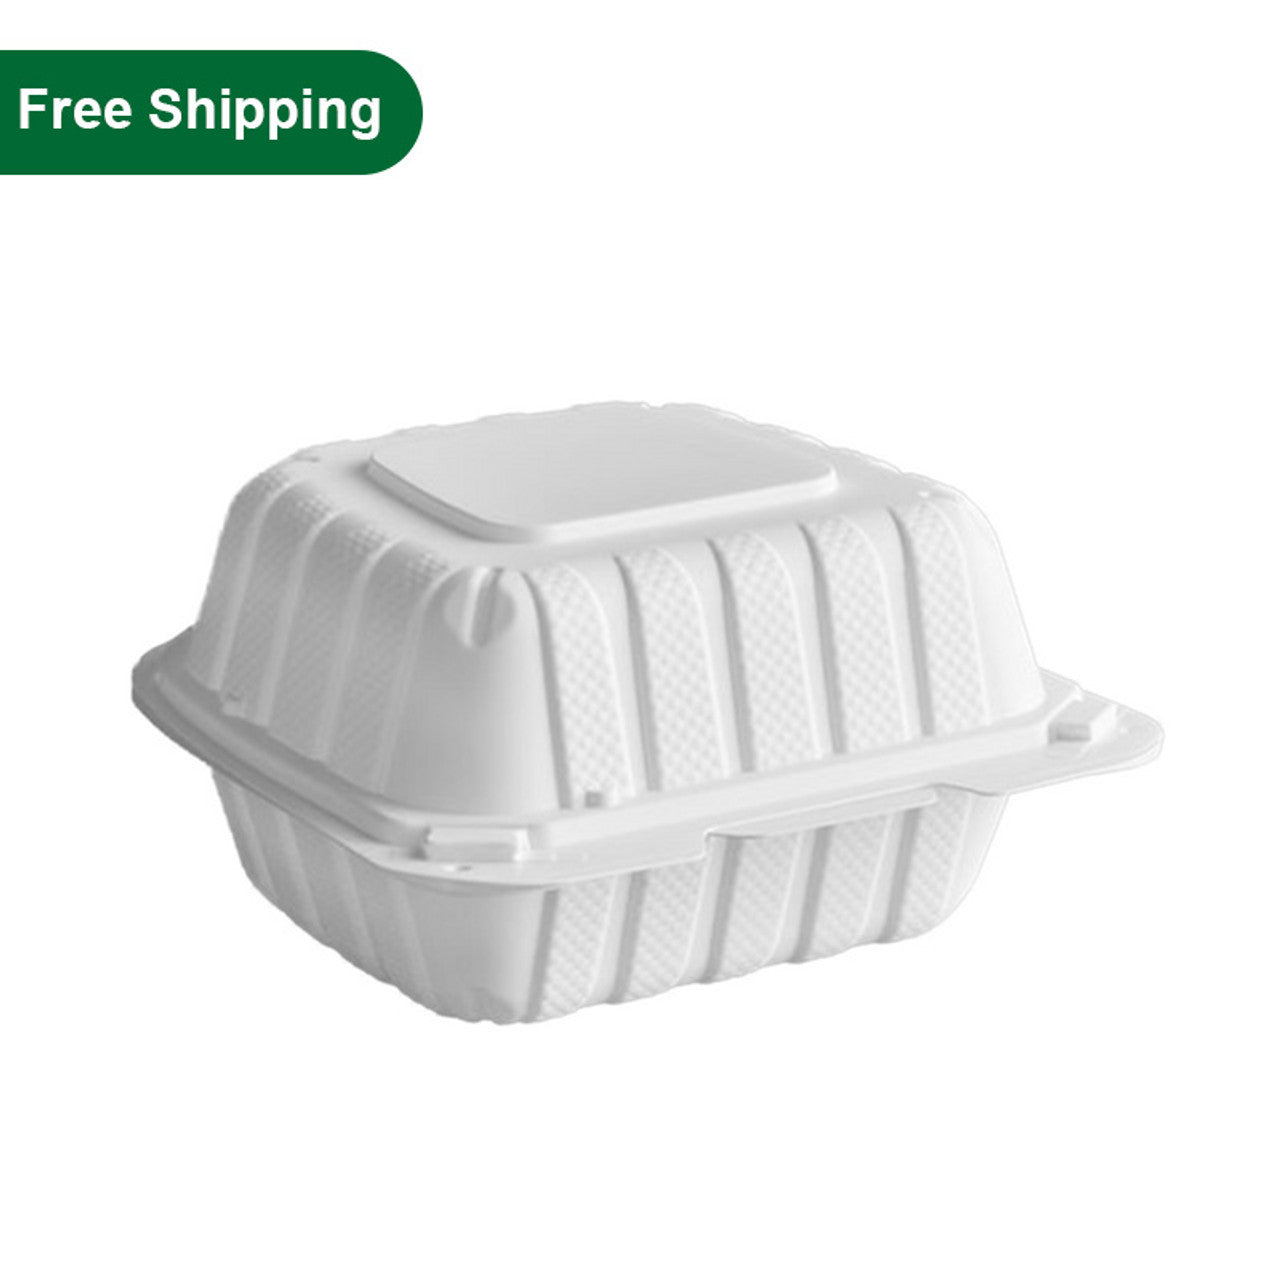 6" Microwaveable Plastic Clamshell Food Containers 250pcs